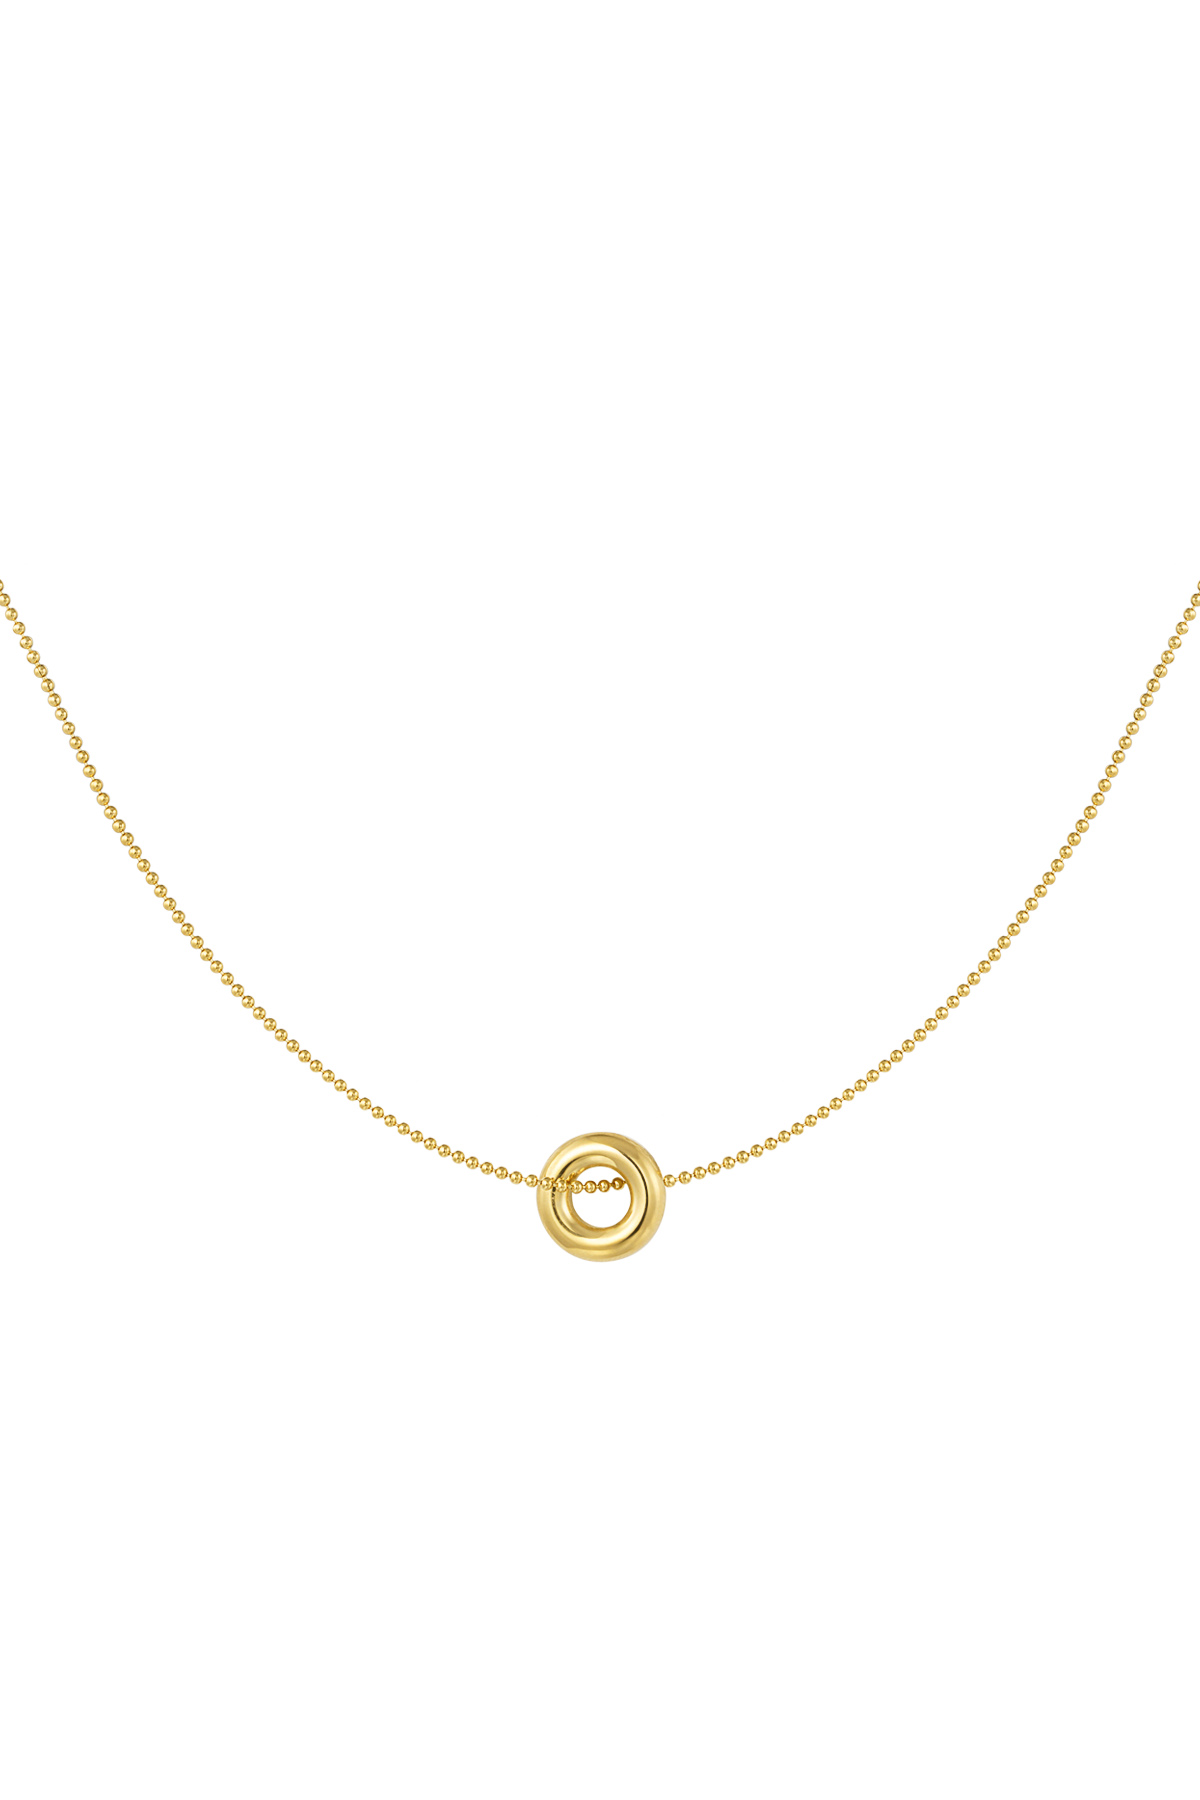 Necklace donut charm - gold 